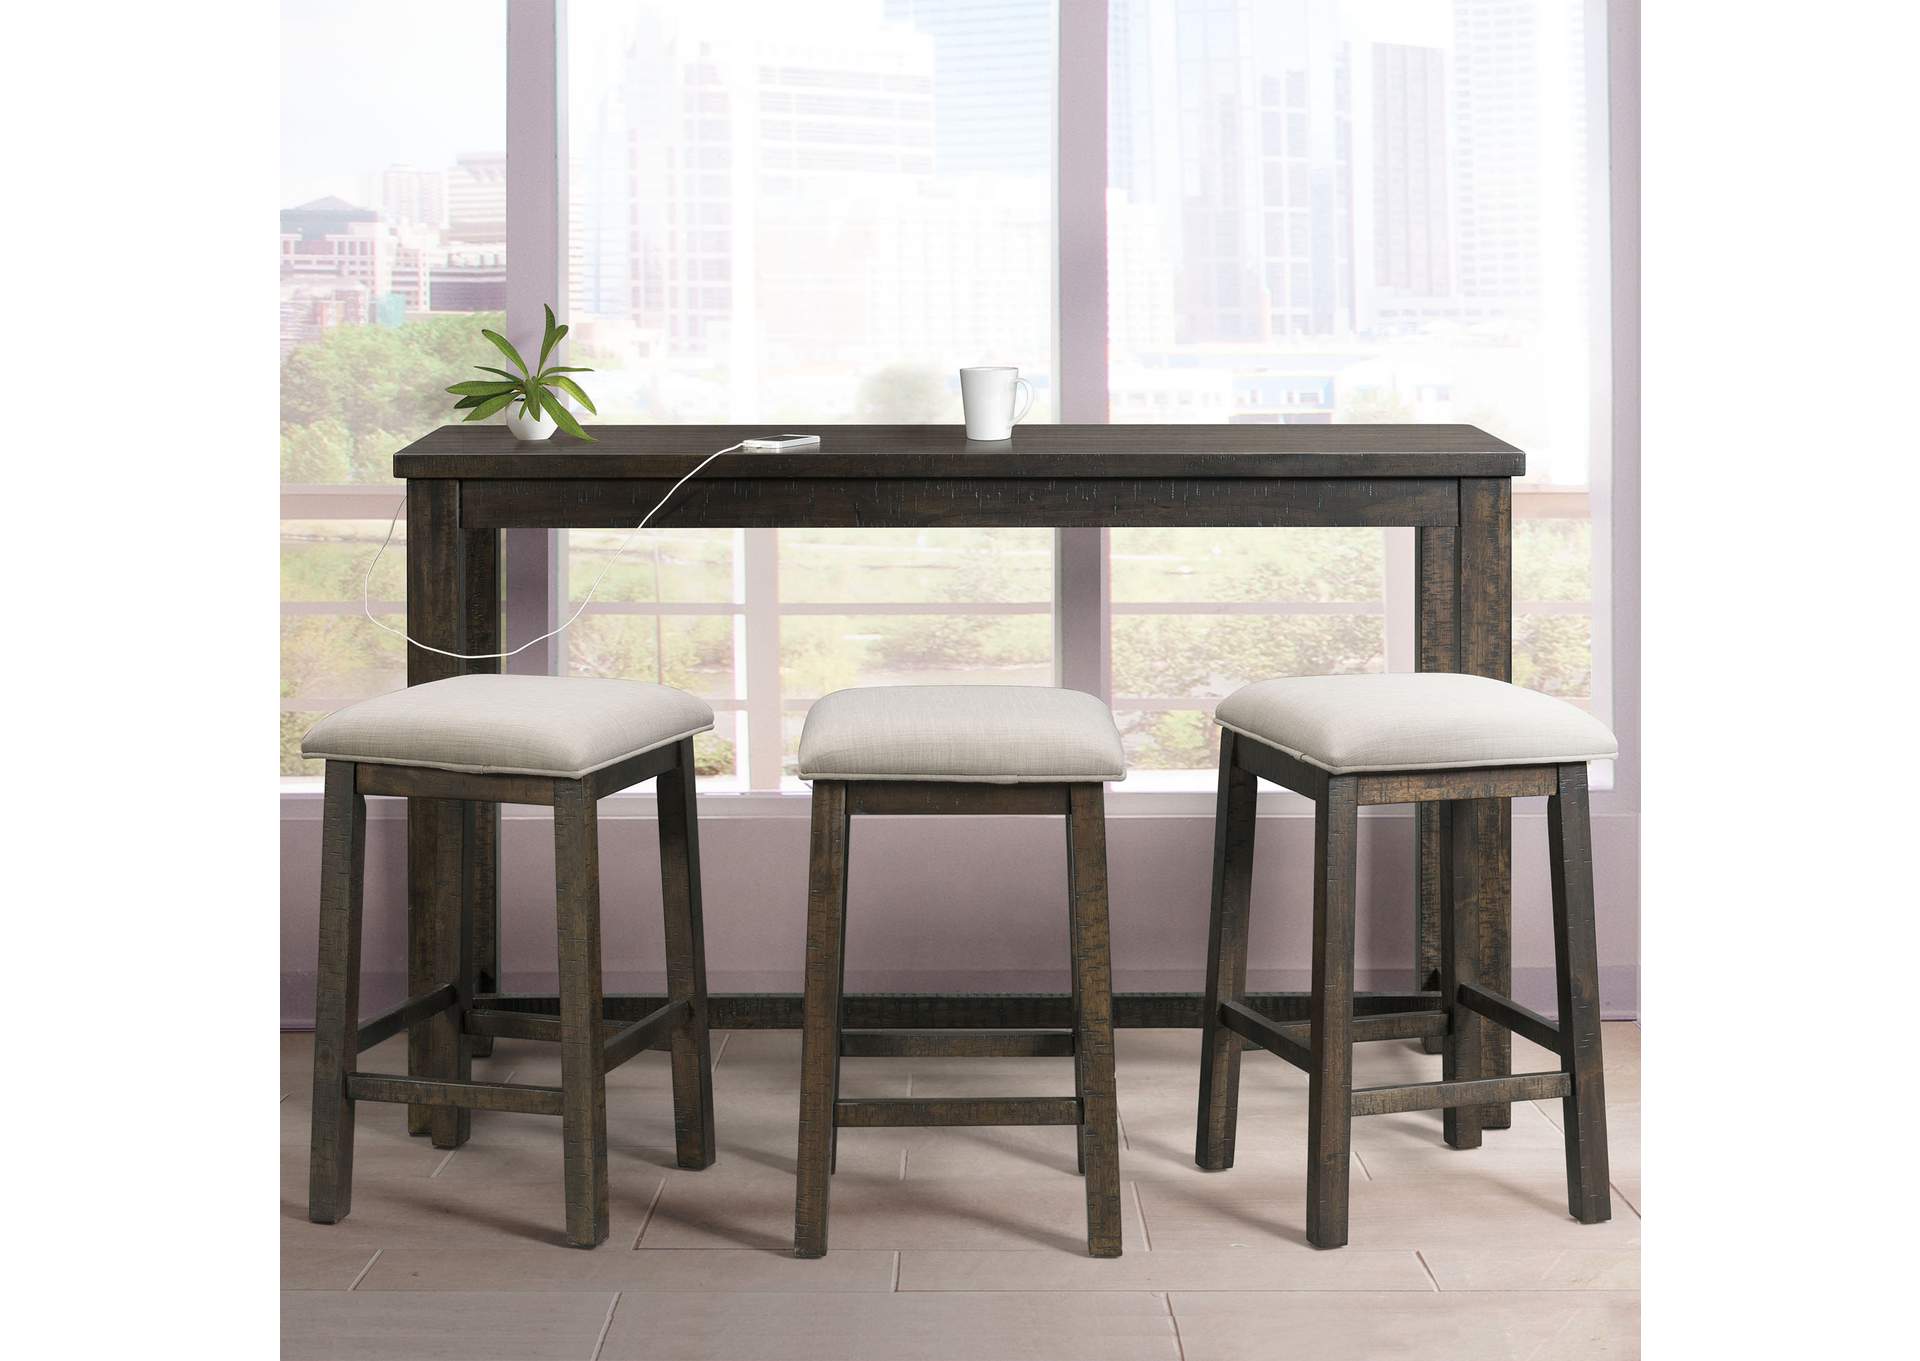 Stone Occasional Bar Table Single Pack Table Three Stools,Elements